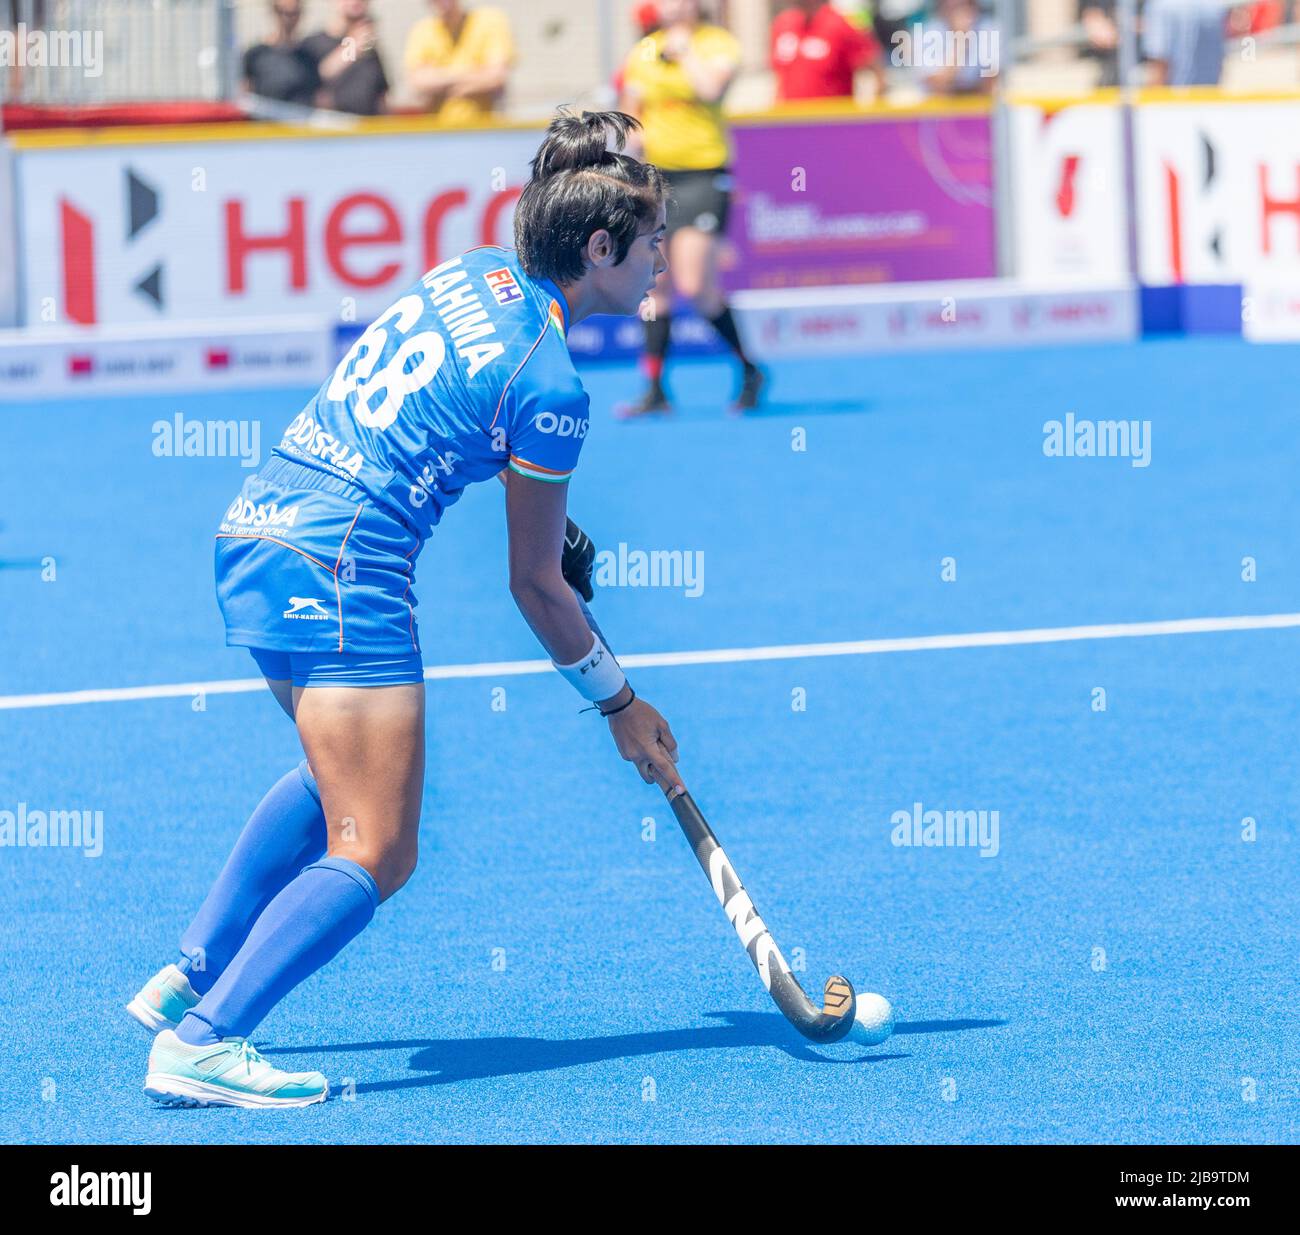 Lausanne Switzerland, 4th May 2022:  Mahima Choudhary of India (68) is in action during FIH Hockey5S Lausanne 2022. Credit: Eric Dubost/Alamy Live News. Stock Photo